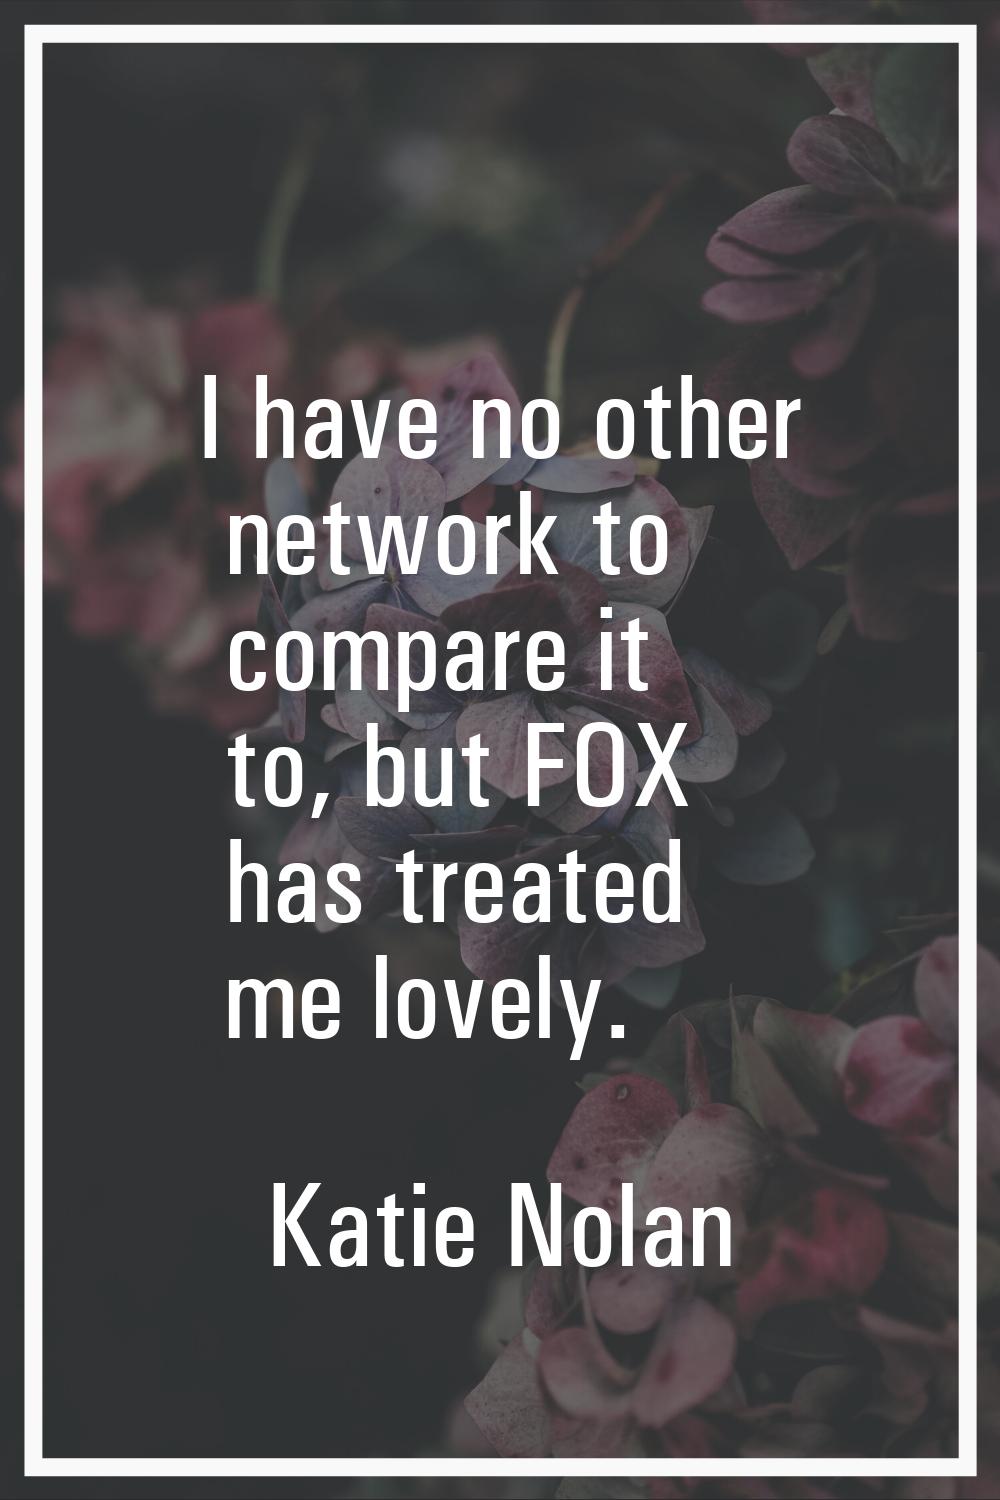 I have no other network to compare it to, but FOX has treated me lovely.